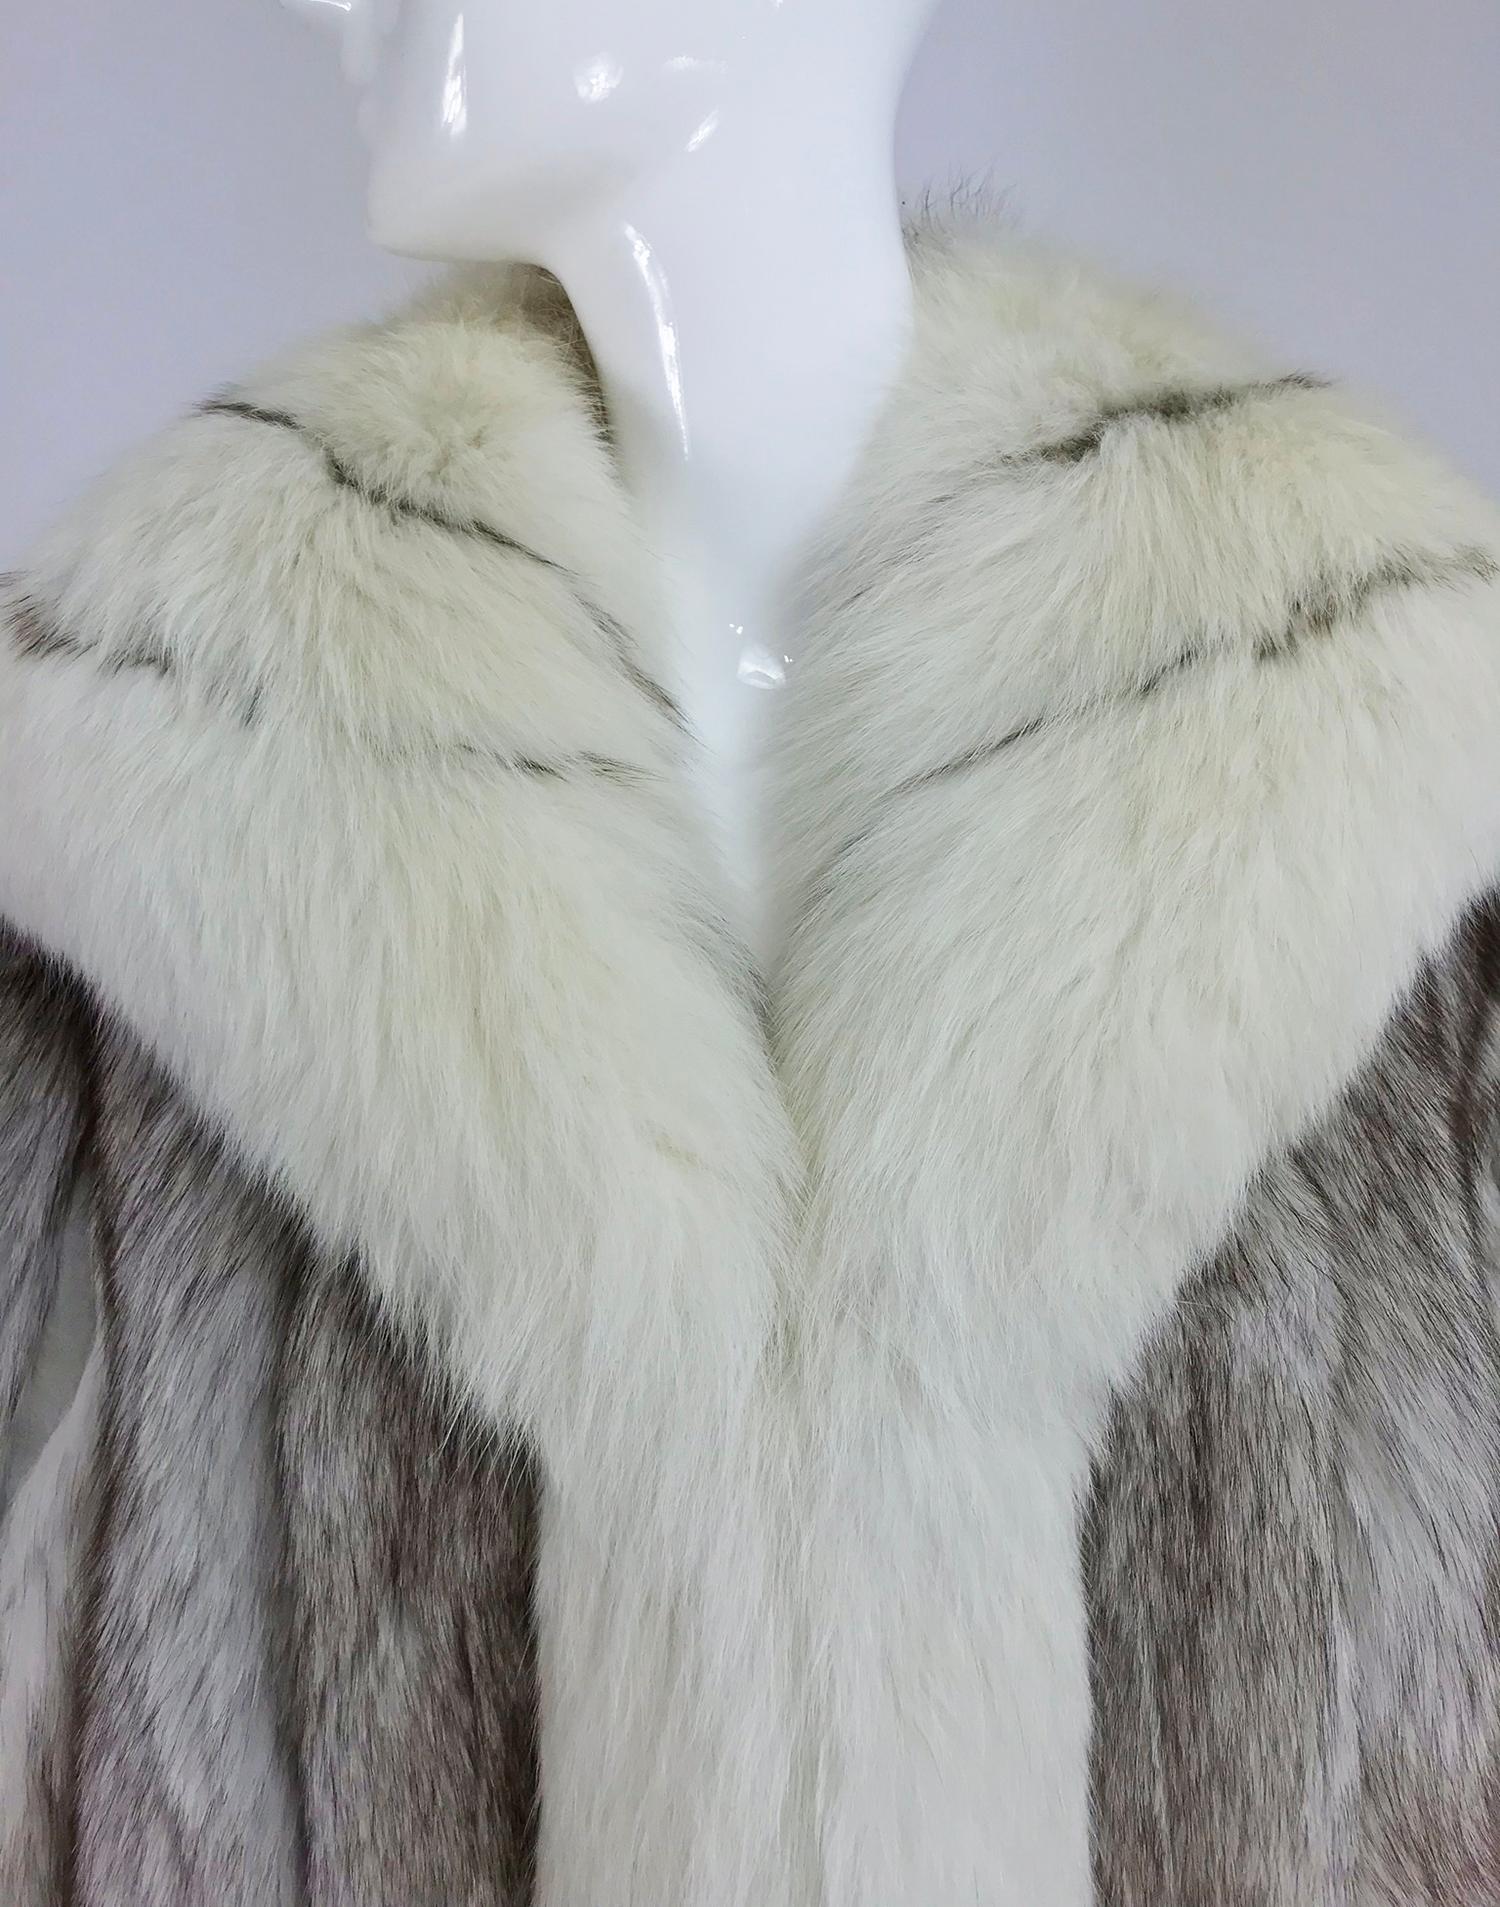 Harold J Rubin Original, Silver and cream fox fur jacket From the 1980s. This stylish jacket is soft and full the fur in a light silver, the deep collar and facings in an off white with silver lines. The fur is set in vertical band each separated